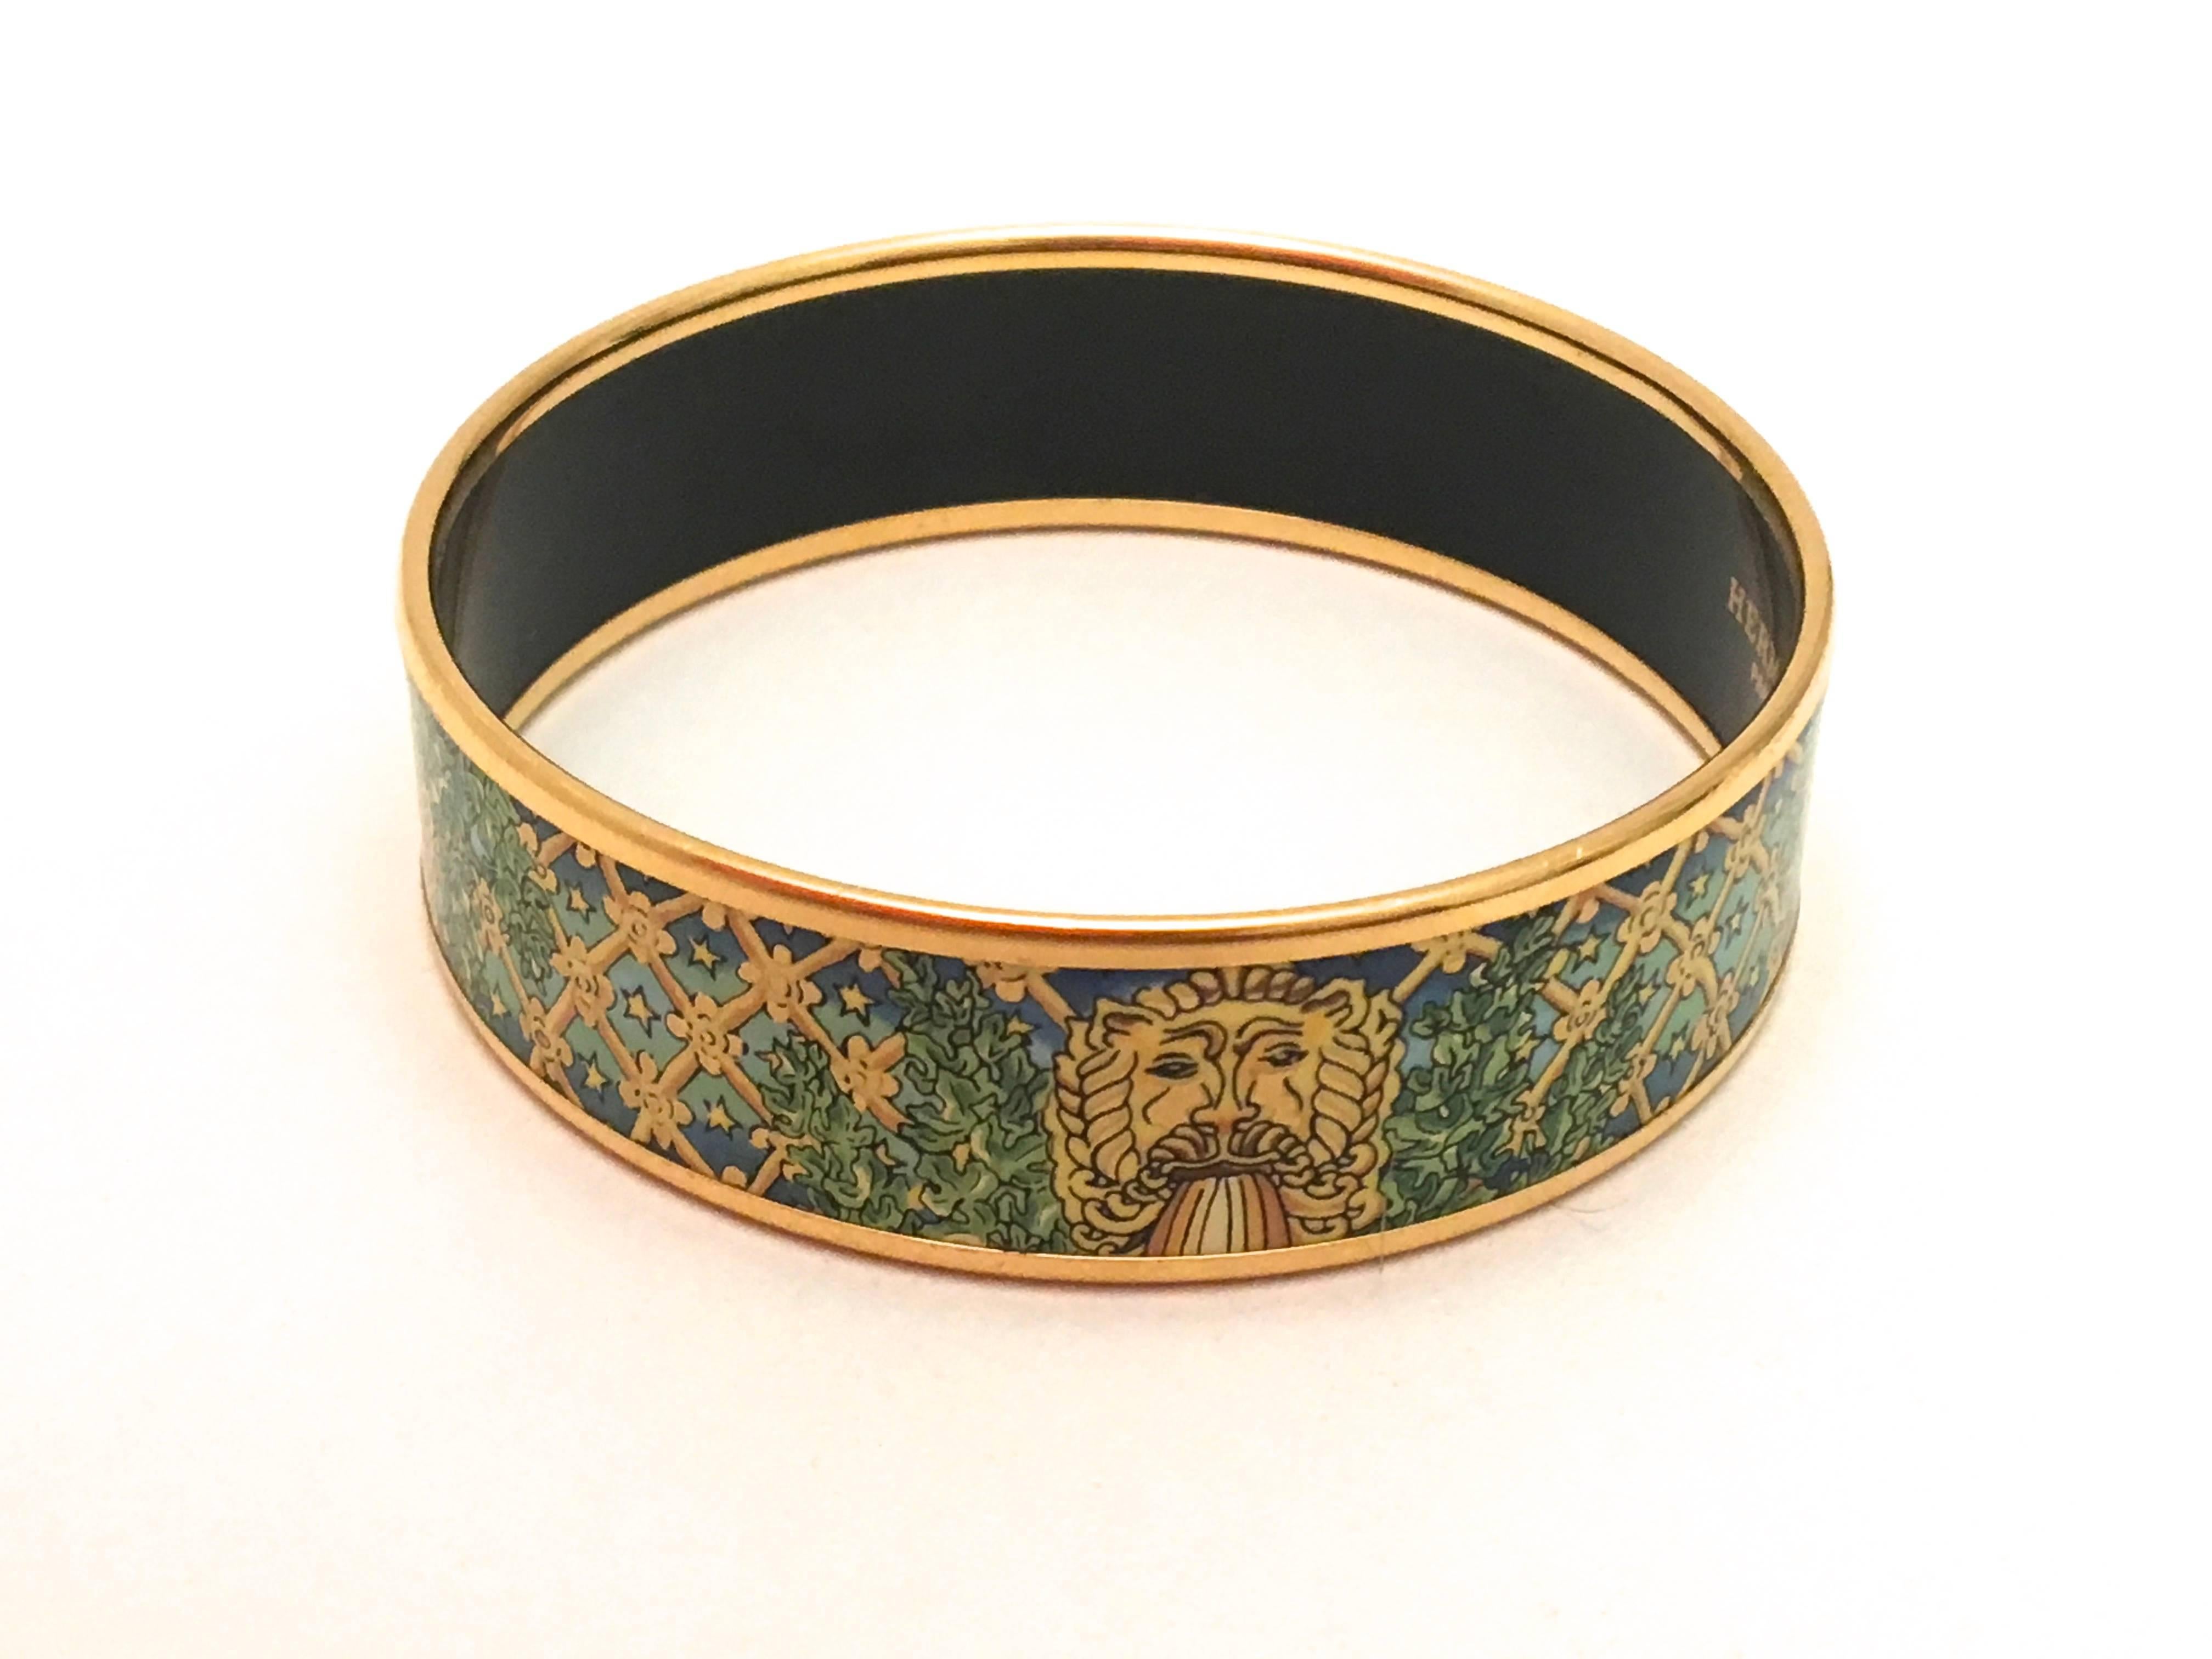 Presented here is a beautiful classic and rare size large (3/4 inch wide) PM (2.5 inches in diameter) gold tone Hermes bracelet. This magnificent bracelet shows no signs of wear even though it is a very rare older model as denoted by the 'Made in